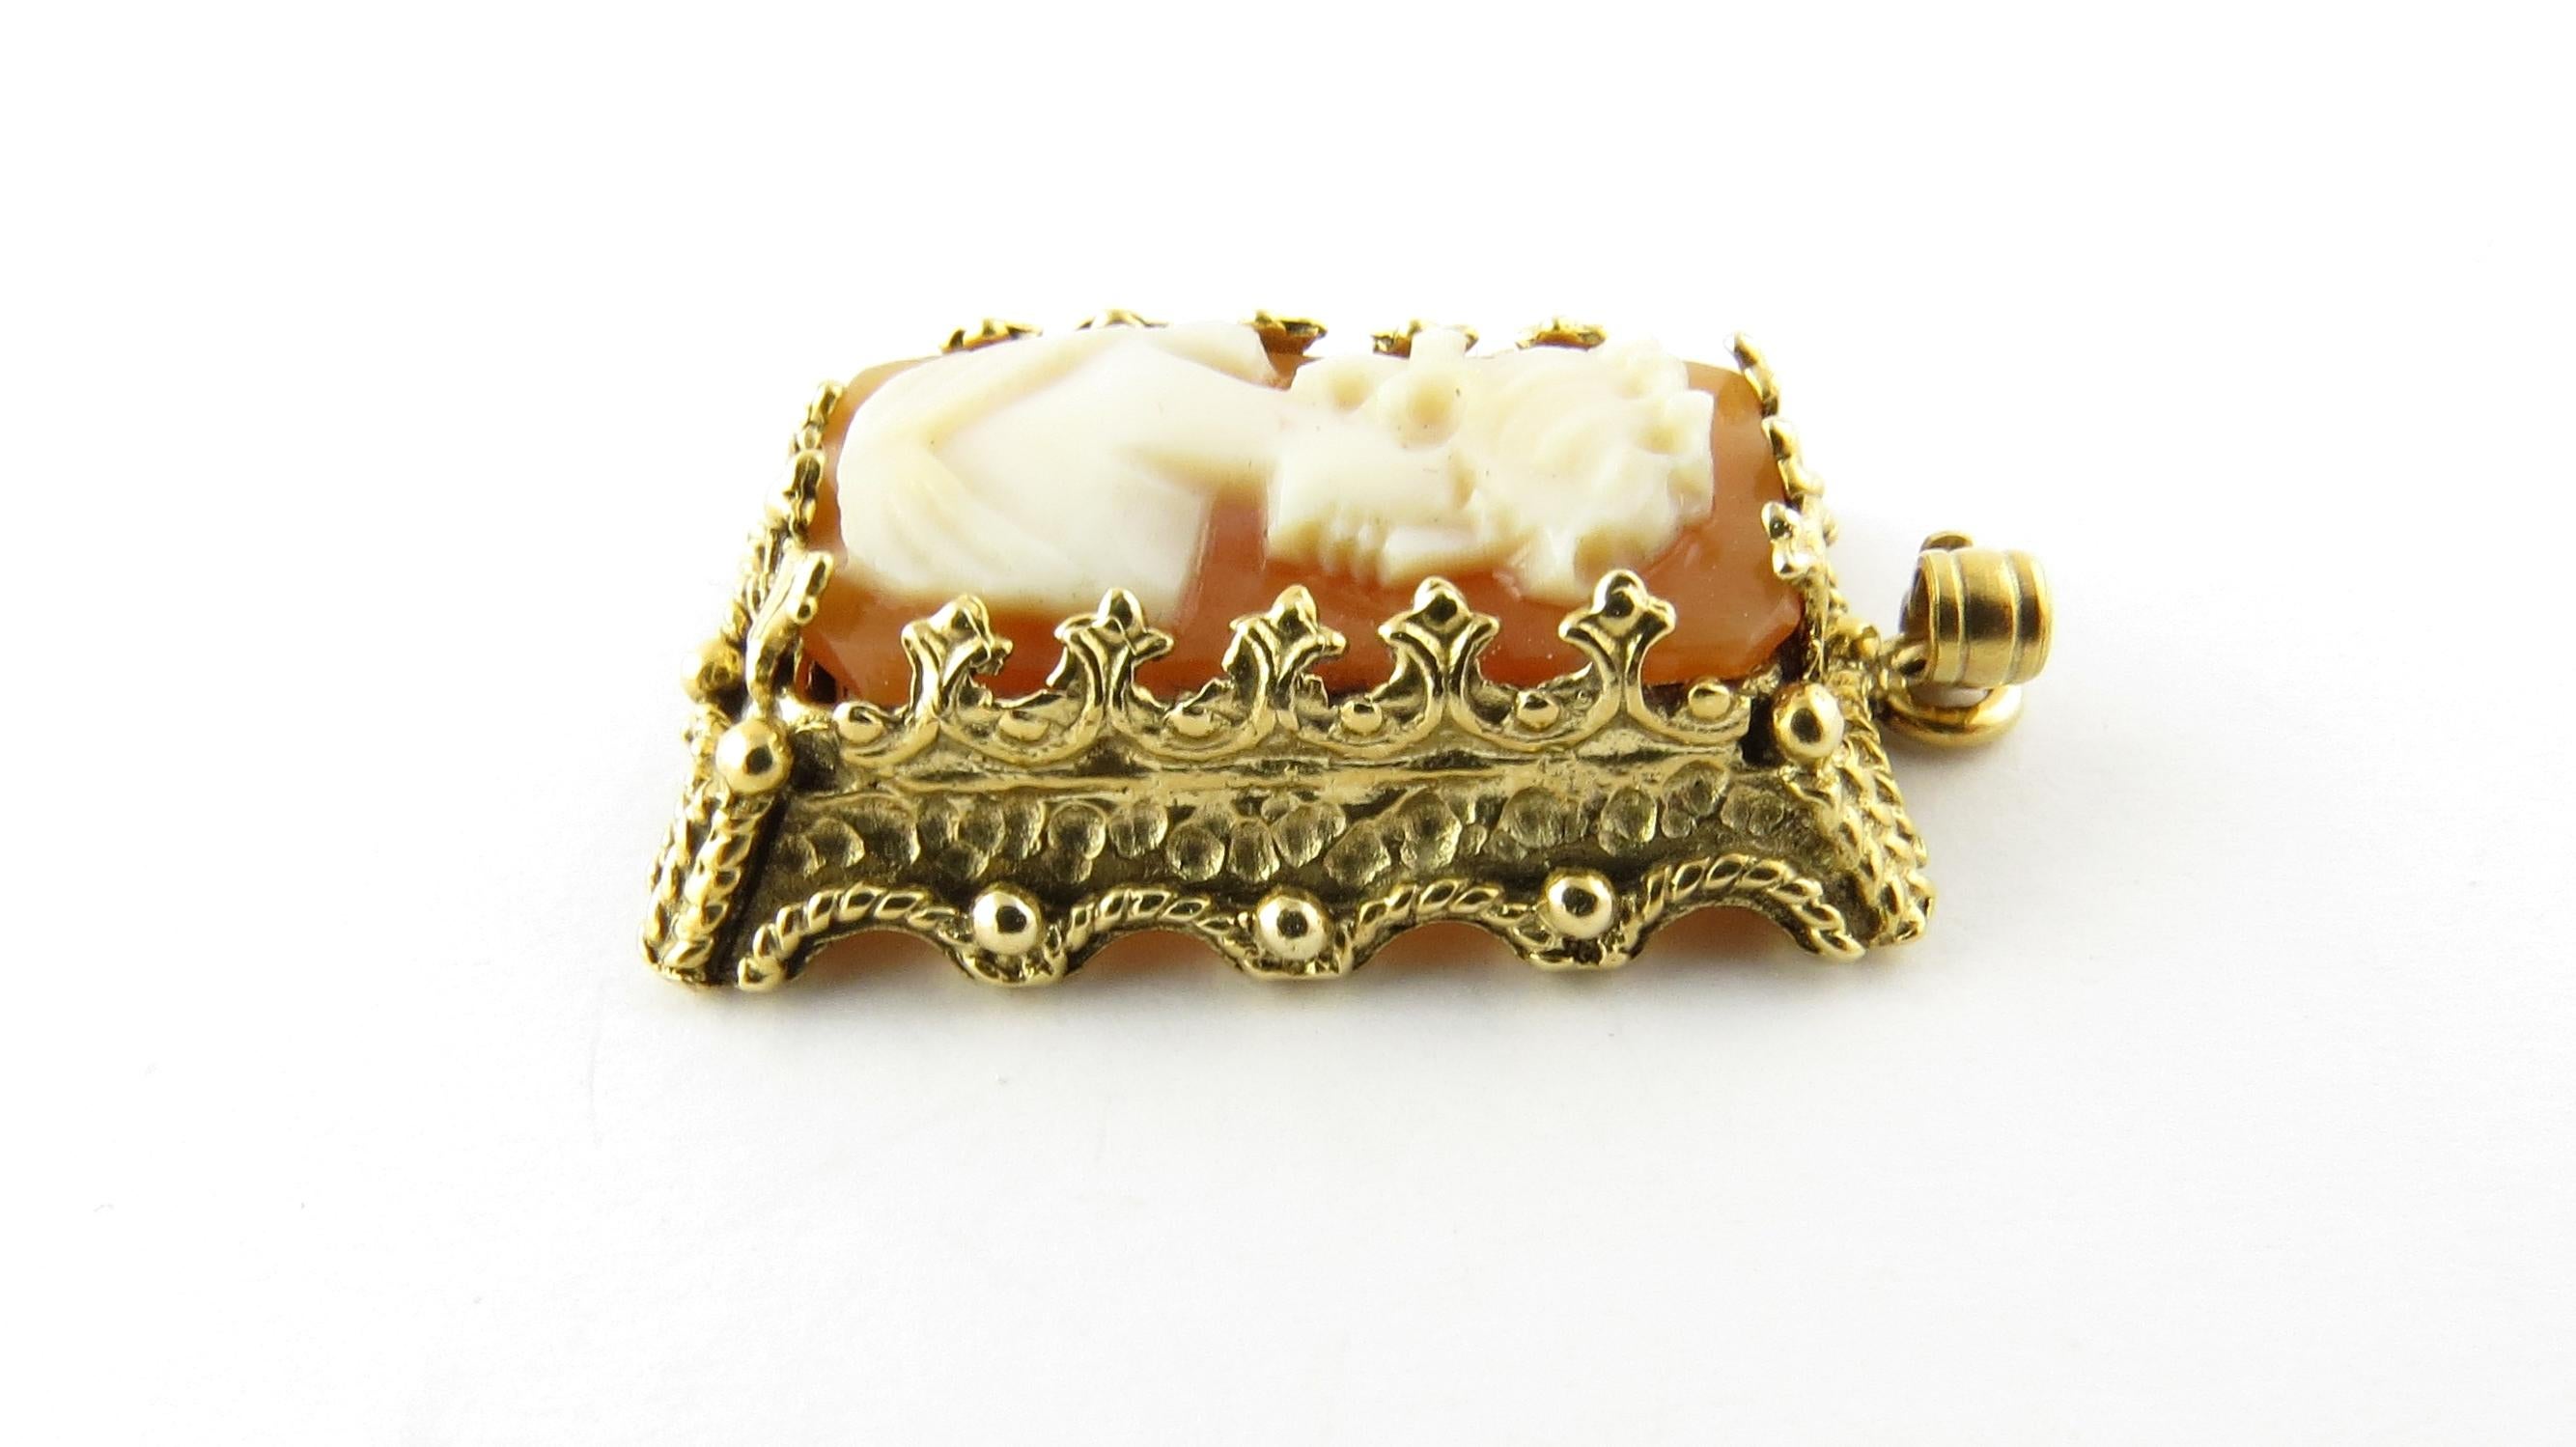 Vintage 14K Yellow Gold Cameo Pendant 

Measures approx. 21 mm length x 14 mm wide and 5 mm in depth 

Weight: 4.3g / 2.7 dwt 

Hallmarked: 14K 

Excellent professionally polished condition. 

Item will be packaged with gift box or pouch and shipped